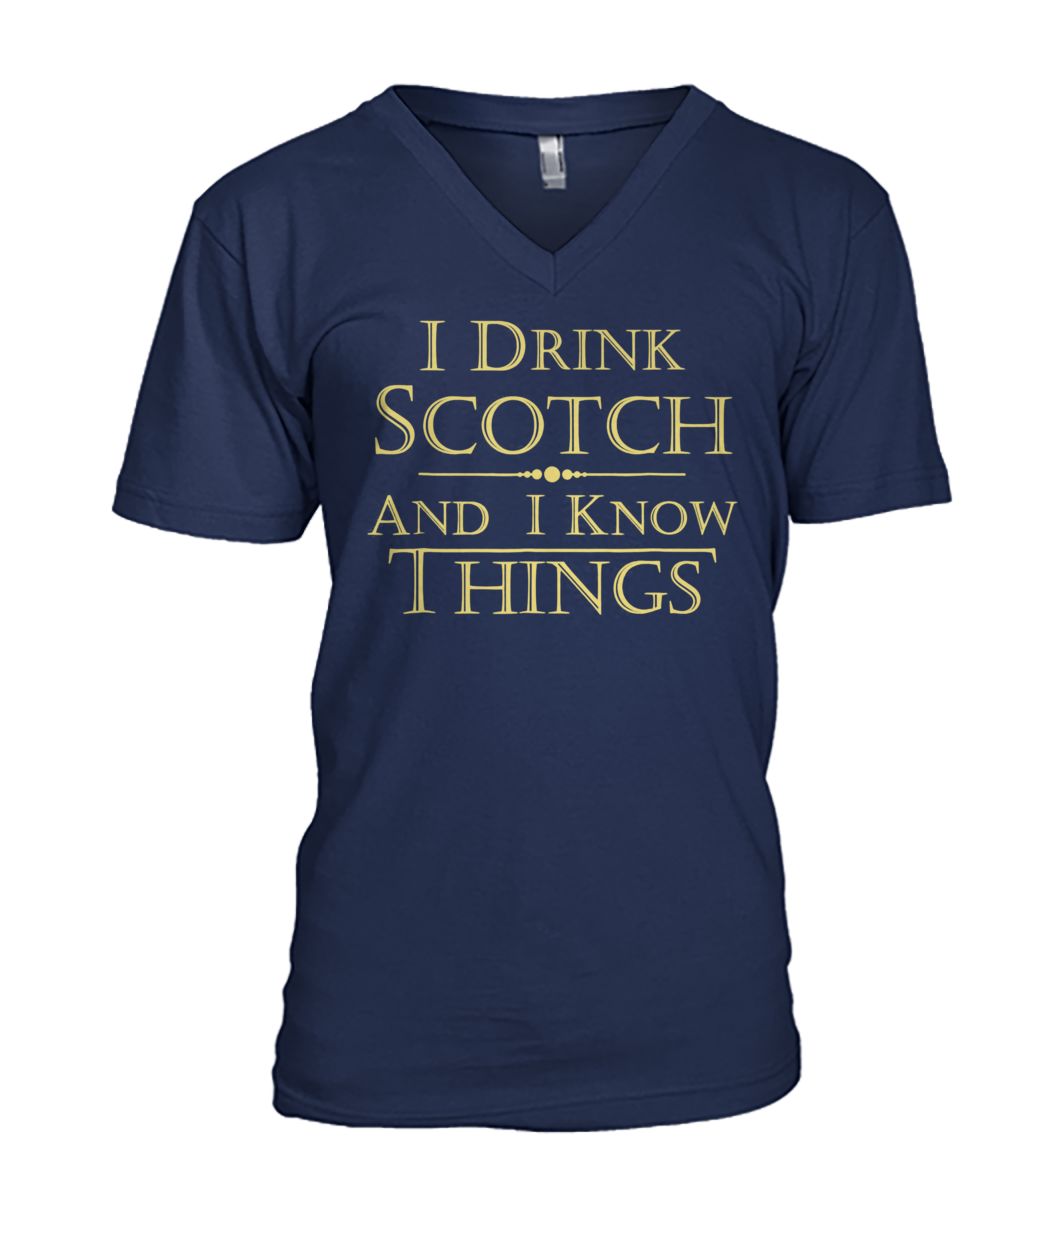 I drink scotch and I know things game of thrones mens v-neck